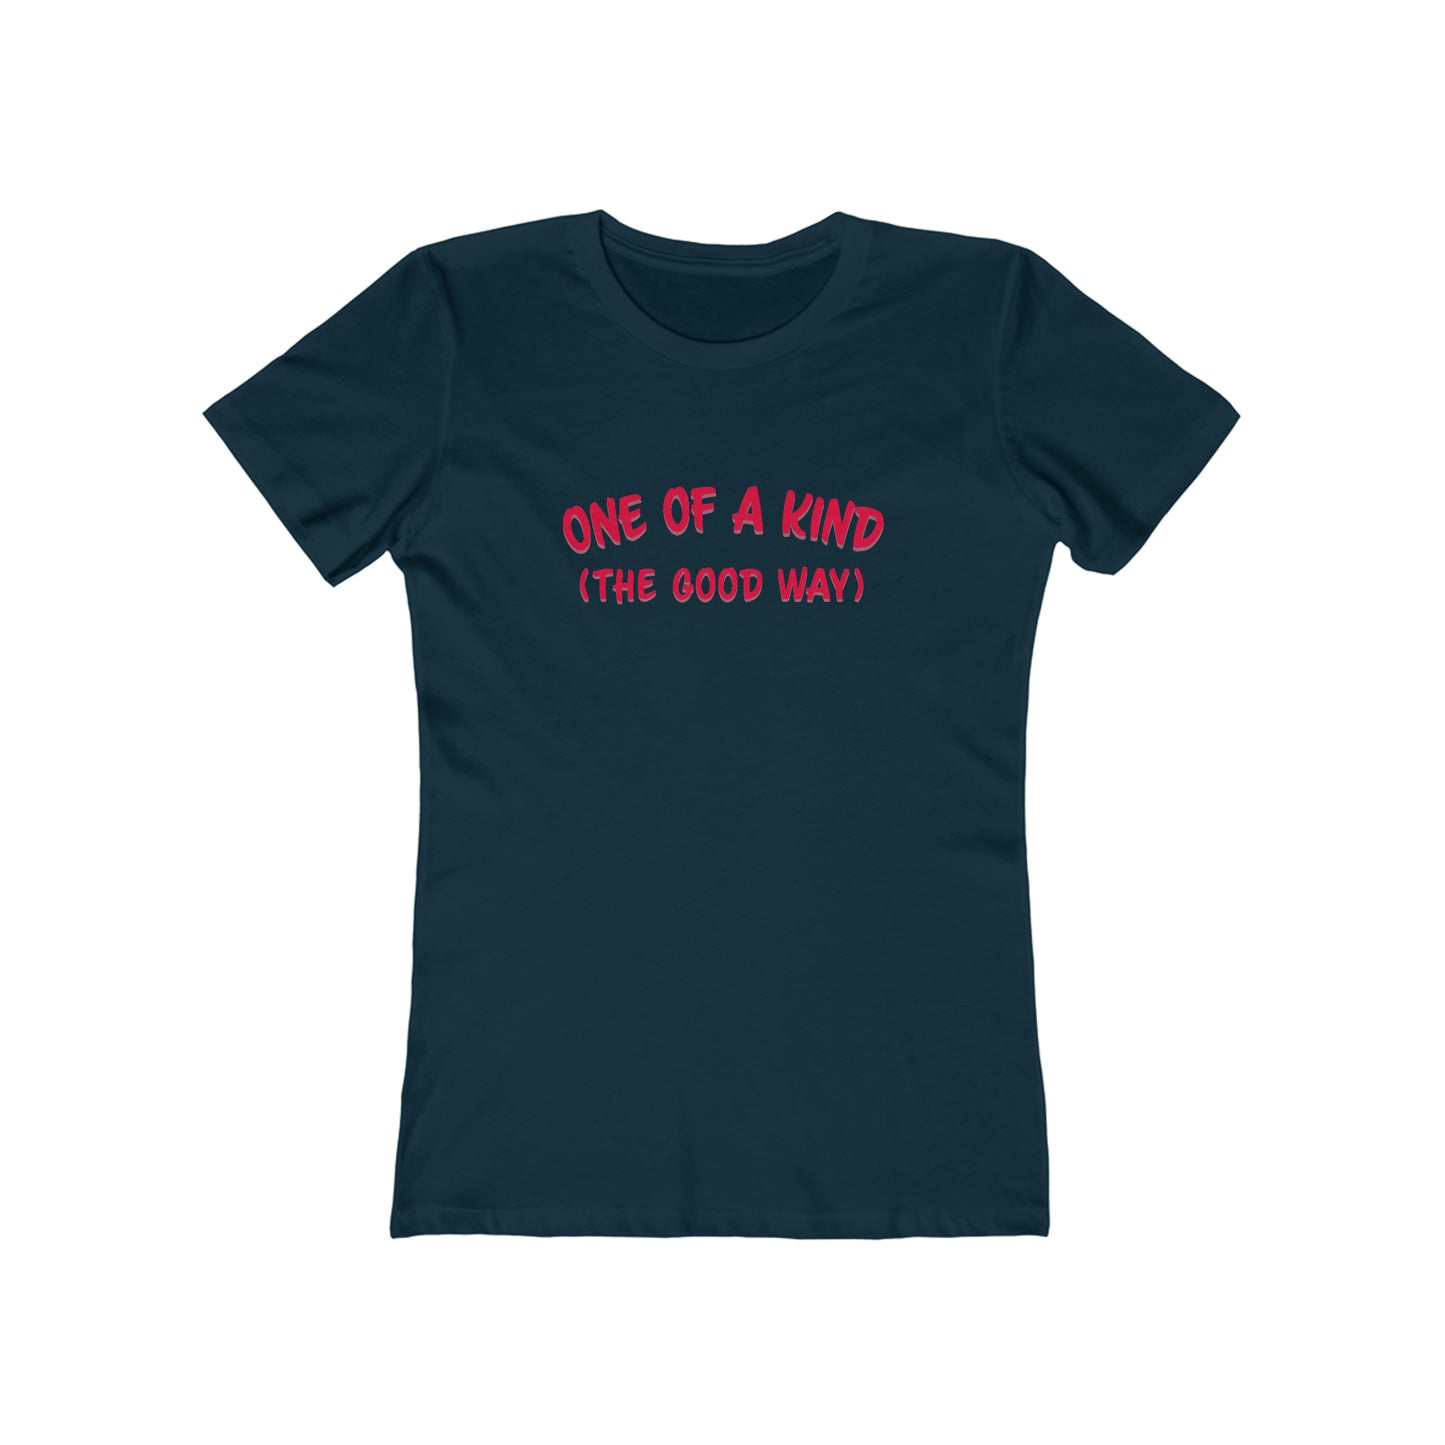 One of a Kind - Women's T-Shirt